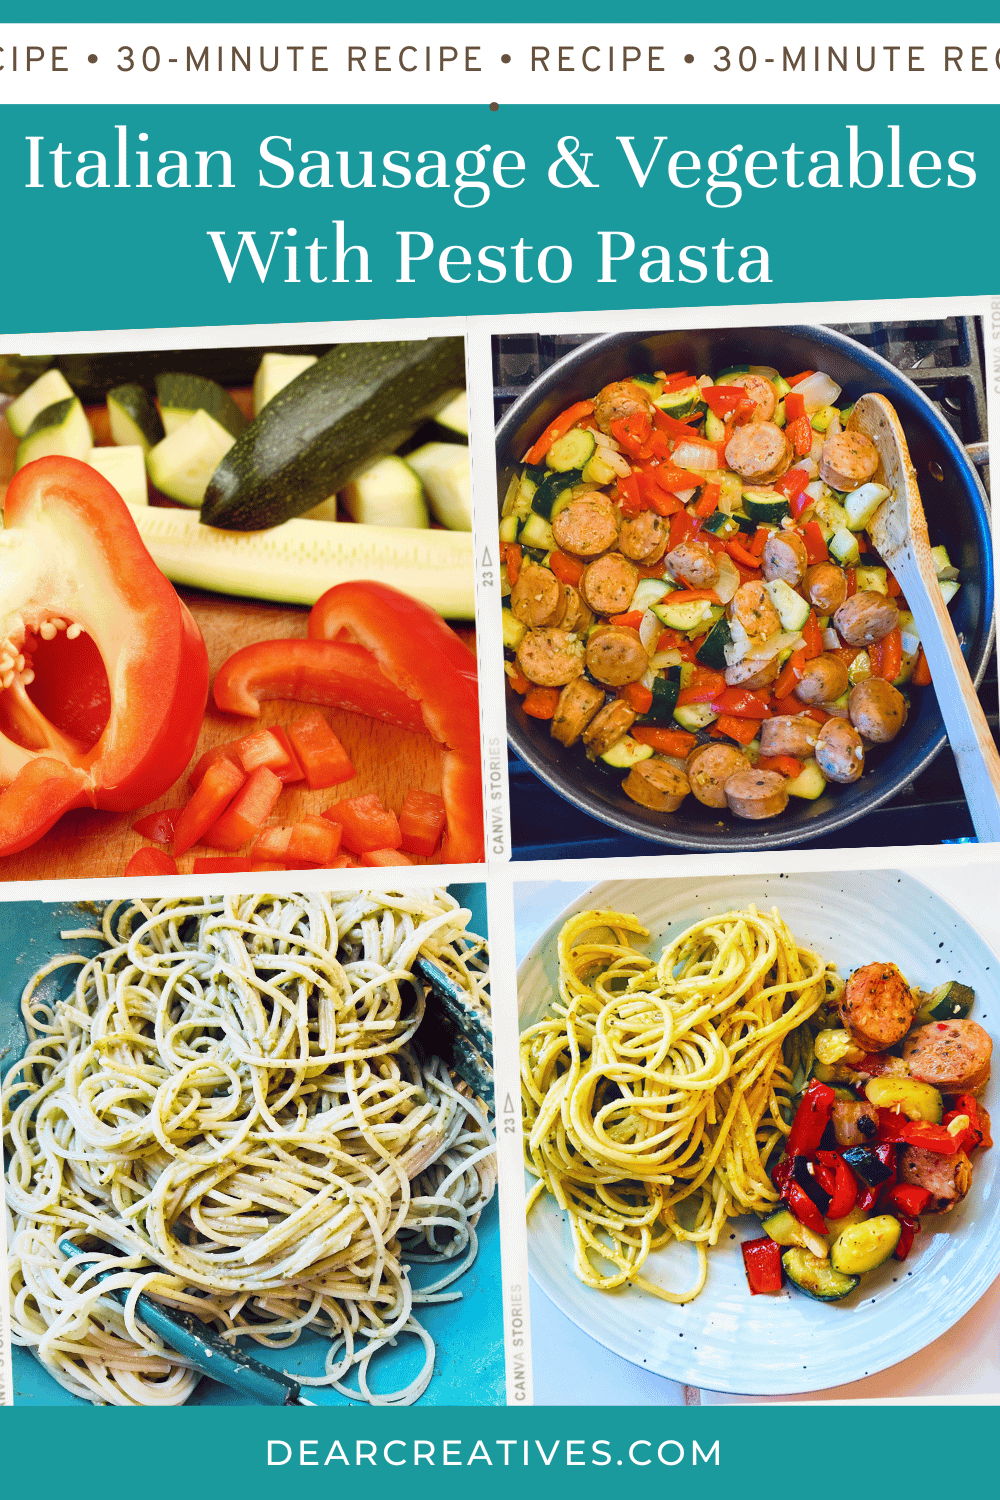  Italian Sausage and Vegetables Recipe - Enjoy this dinner any night of the week. A 30-minute meal with Italian sausage and pesto pasta. DearCreatives.com